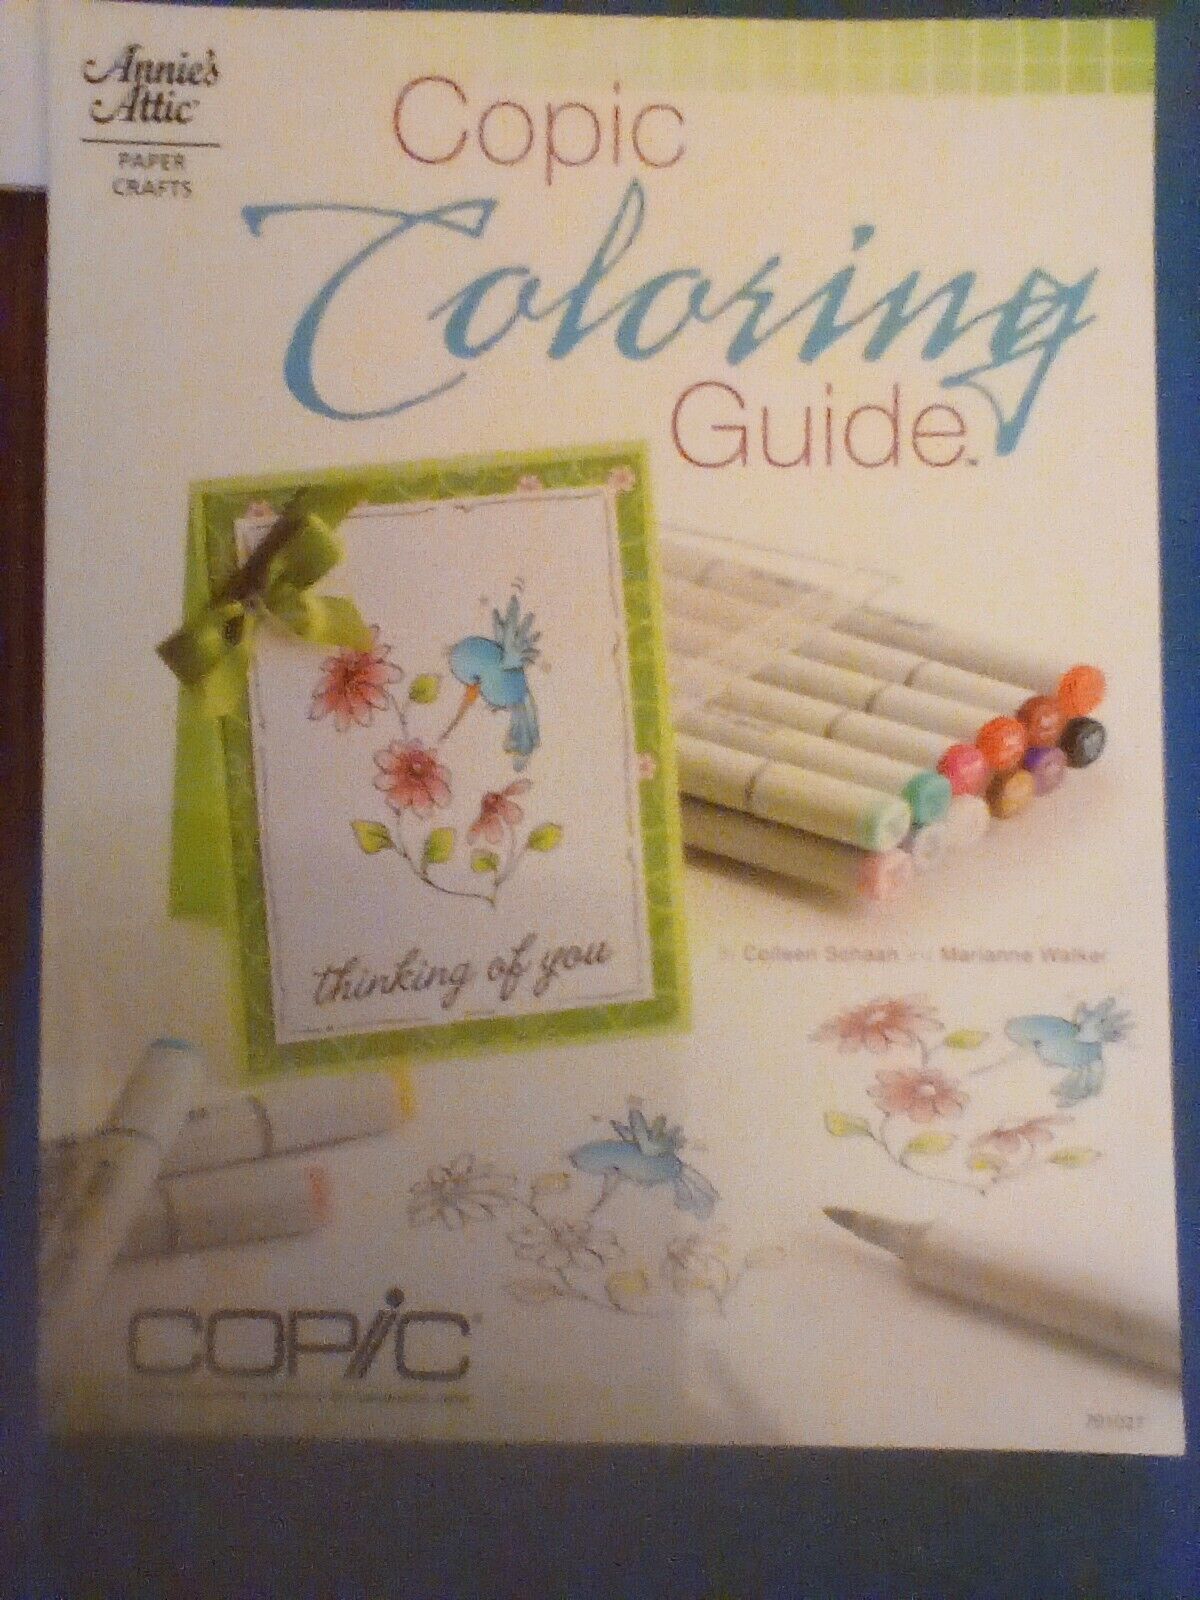 Copic Coloring Guides 1 - 4, Excellent Used Condition